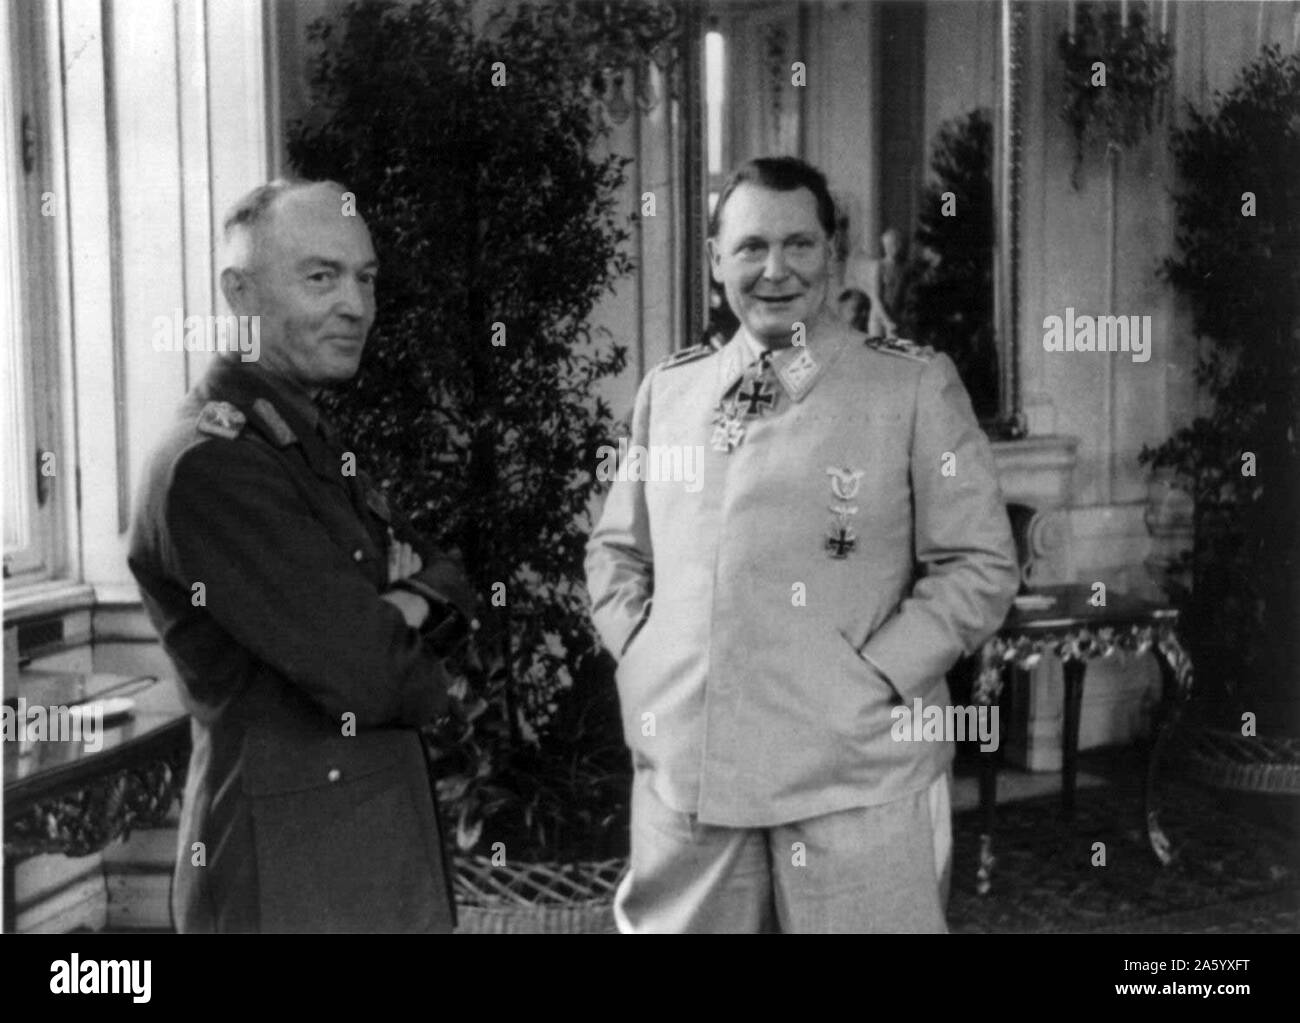 Photograph of Ion Antonescu (1882-1946) and Hermann Göring (1893-1946) at the Belvedere Palace, Vienna, Austria. Dated 1941 Stock Photo